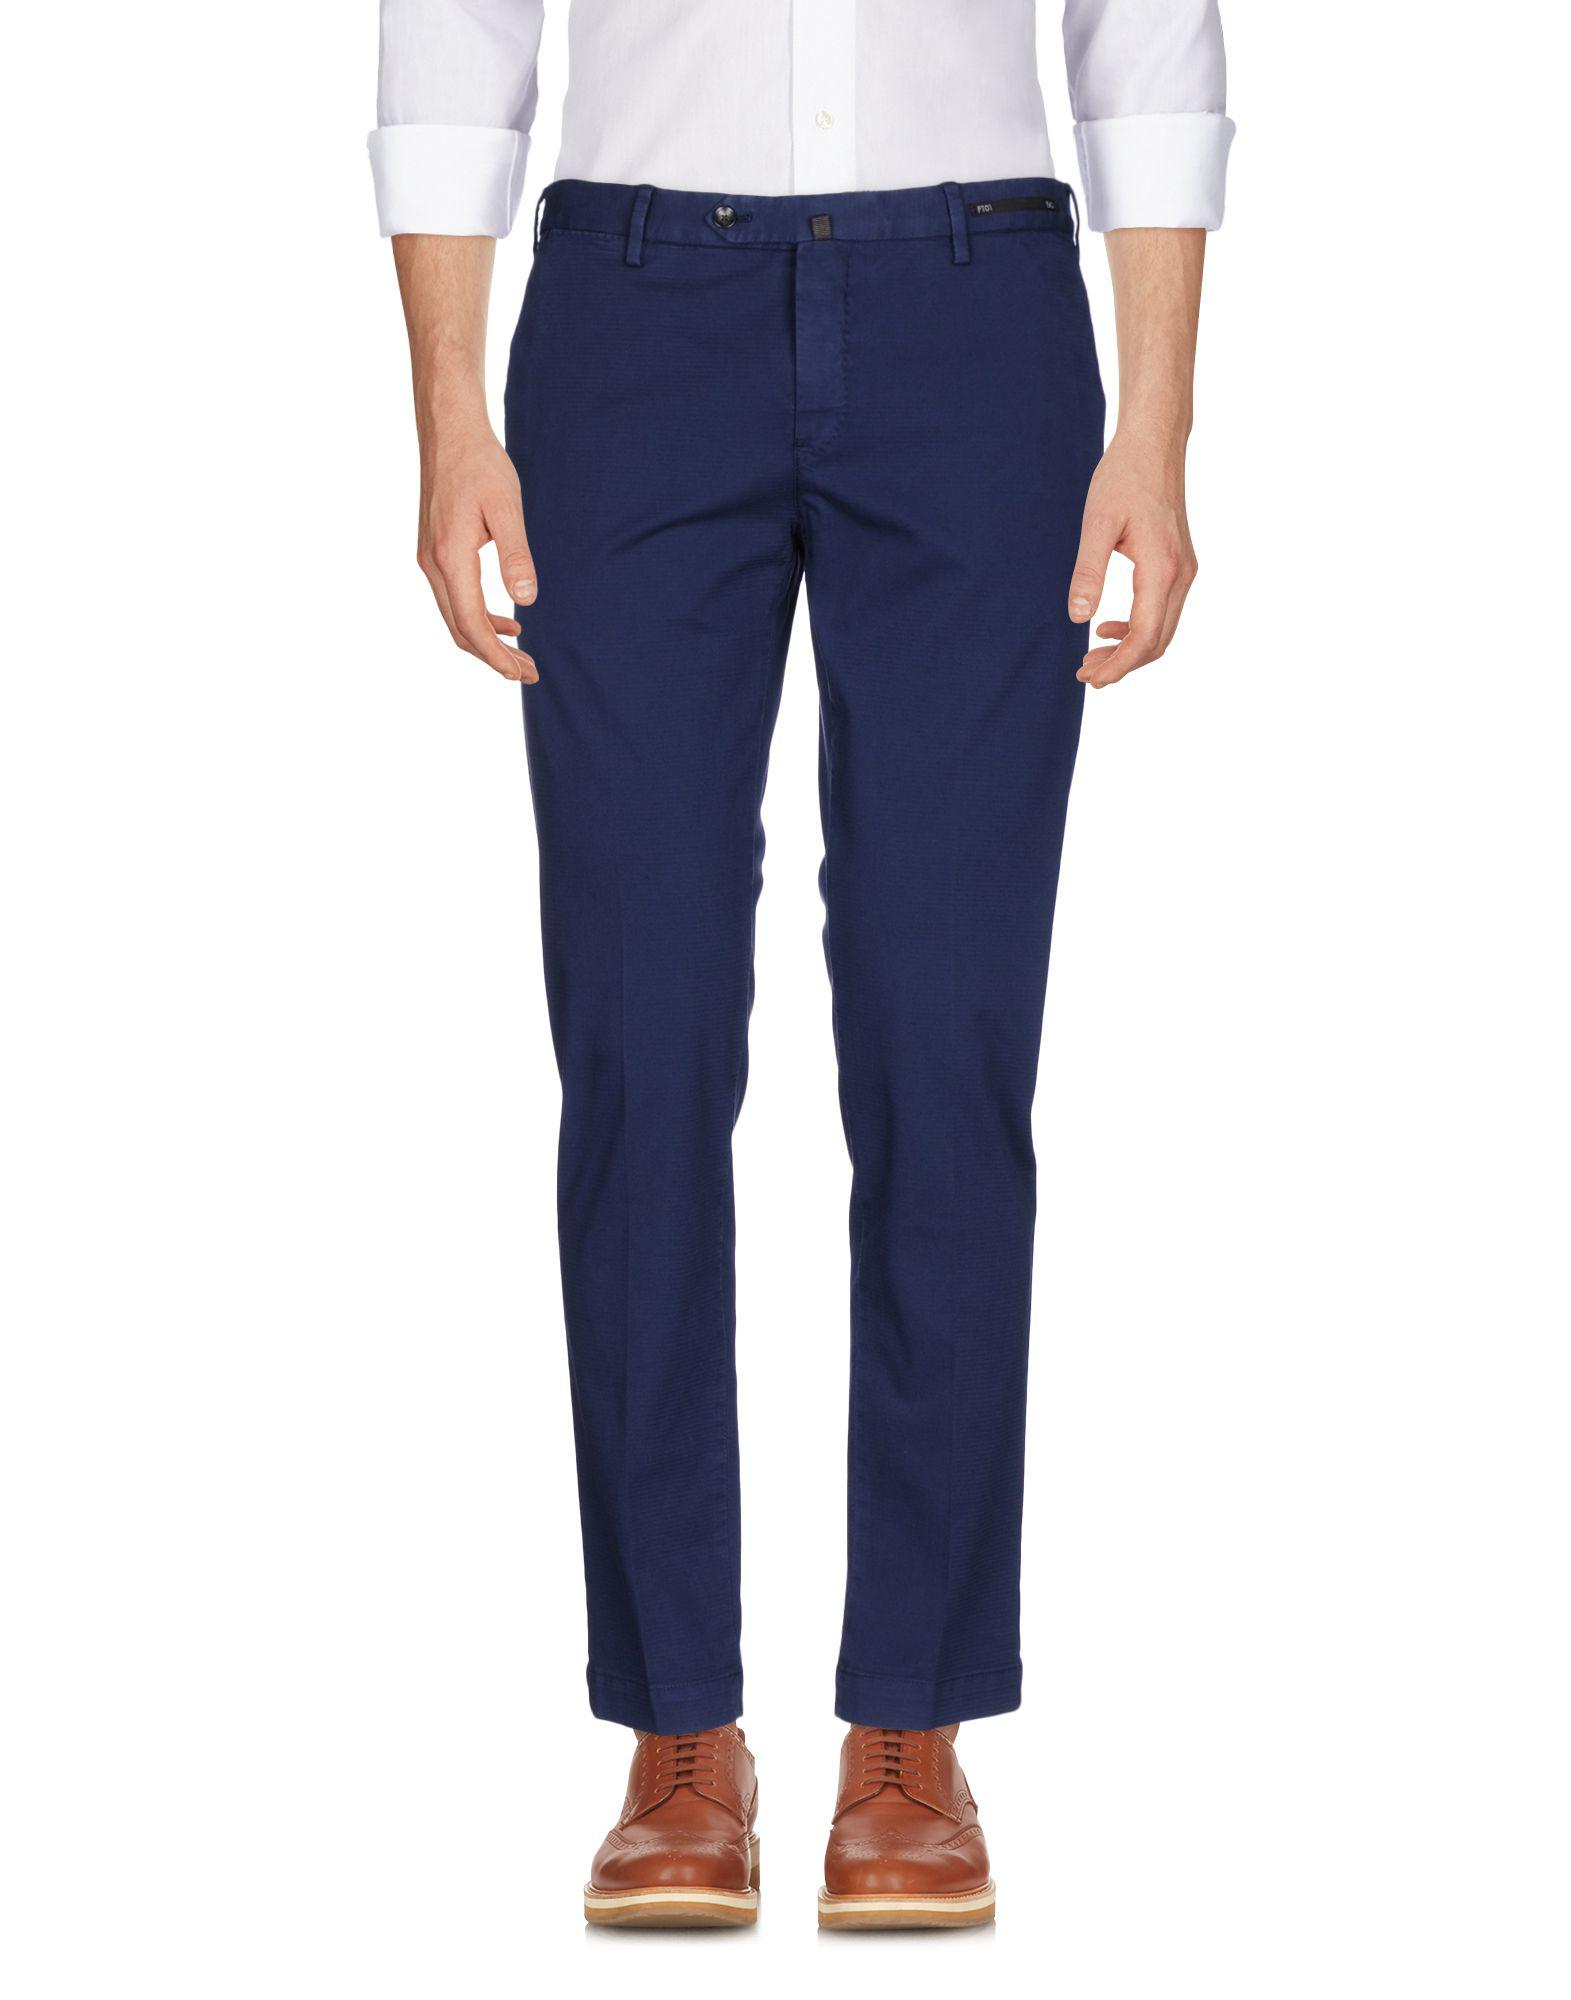 PT01 Cotton Casual Pants in Dark Blue (Blue) for Men - Save 50% - Lyst